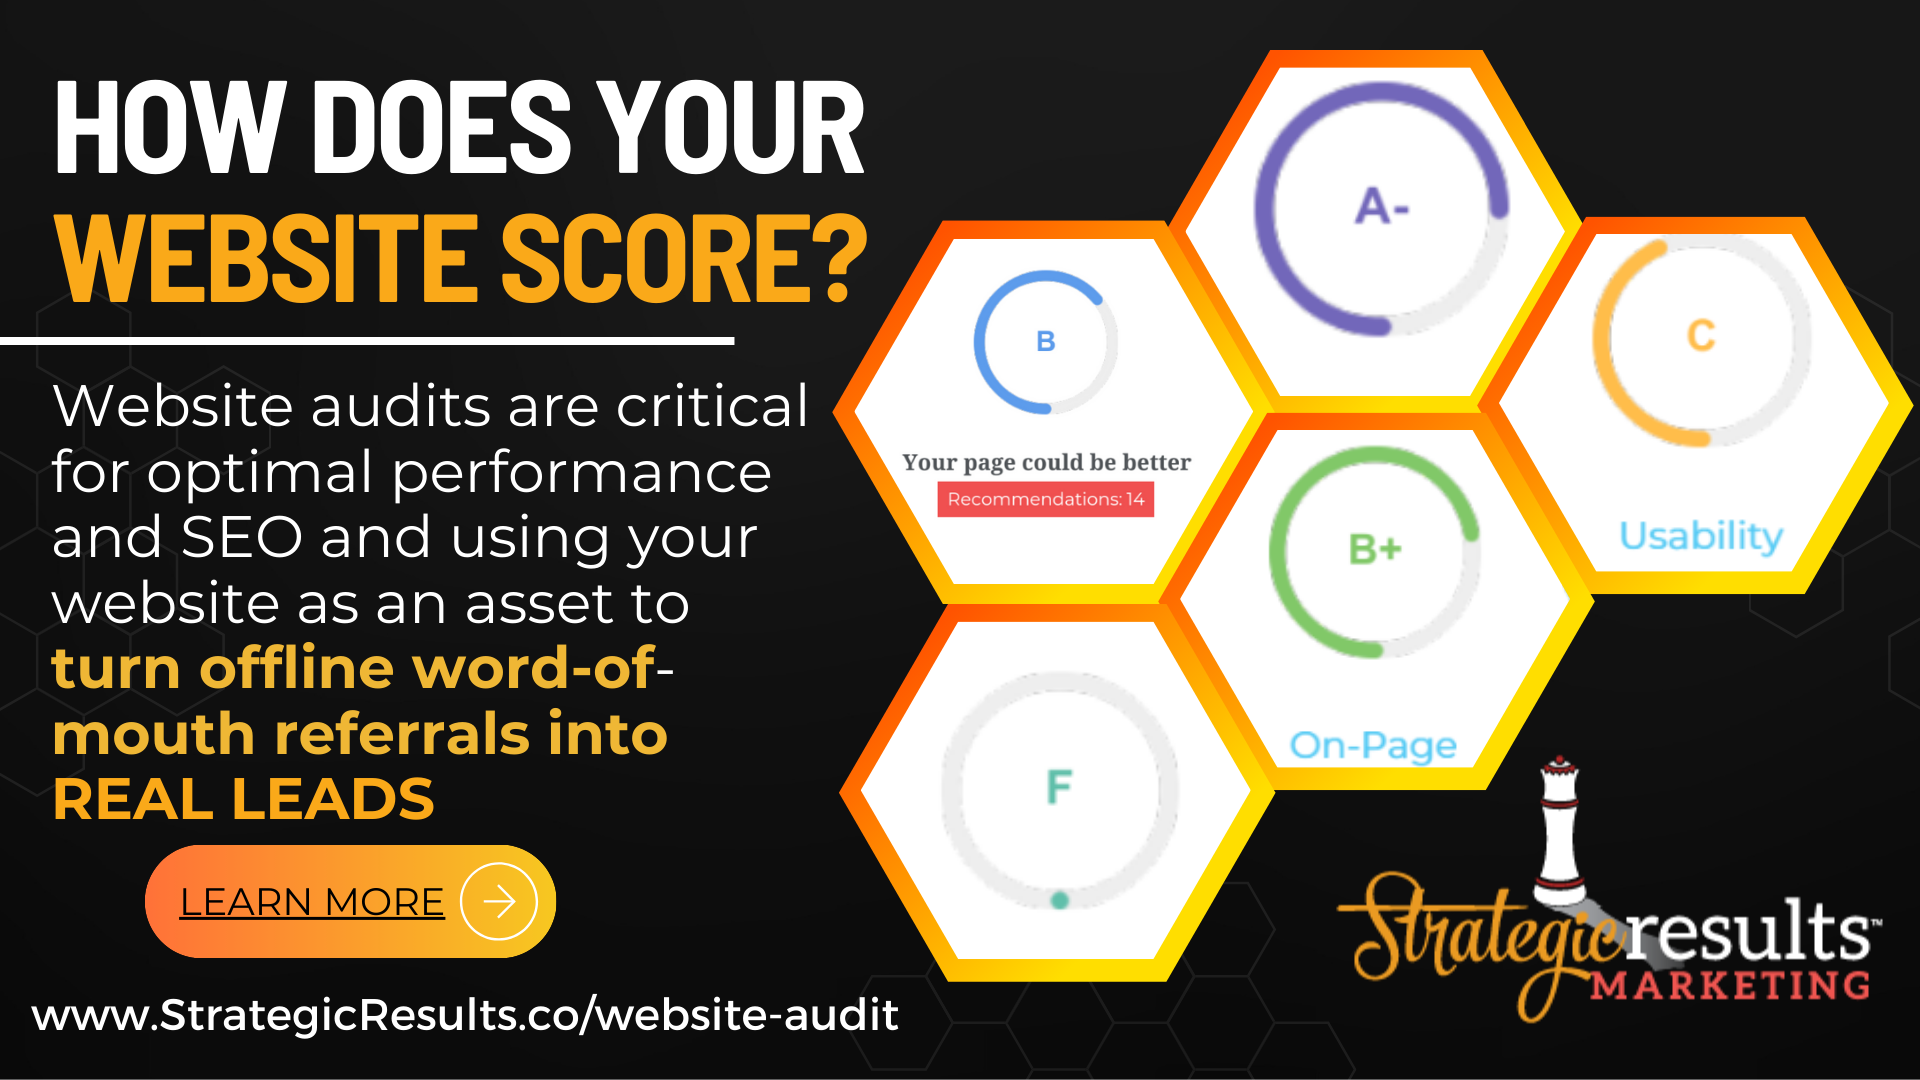 How does your website score? Site audits are citical and include on-page seo, performance, usability, backlinks and social media. this image includes hexagons of scores from A to F and a link to access a free website audit